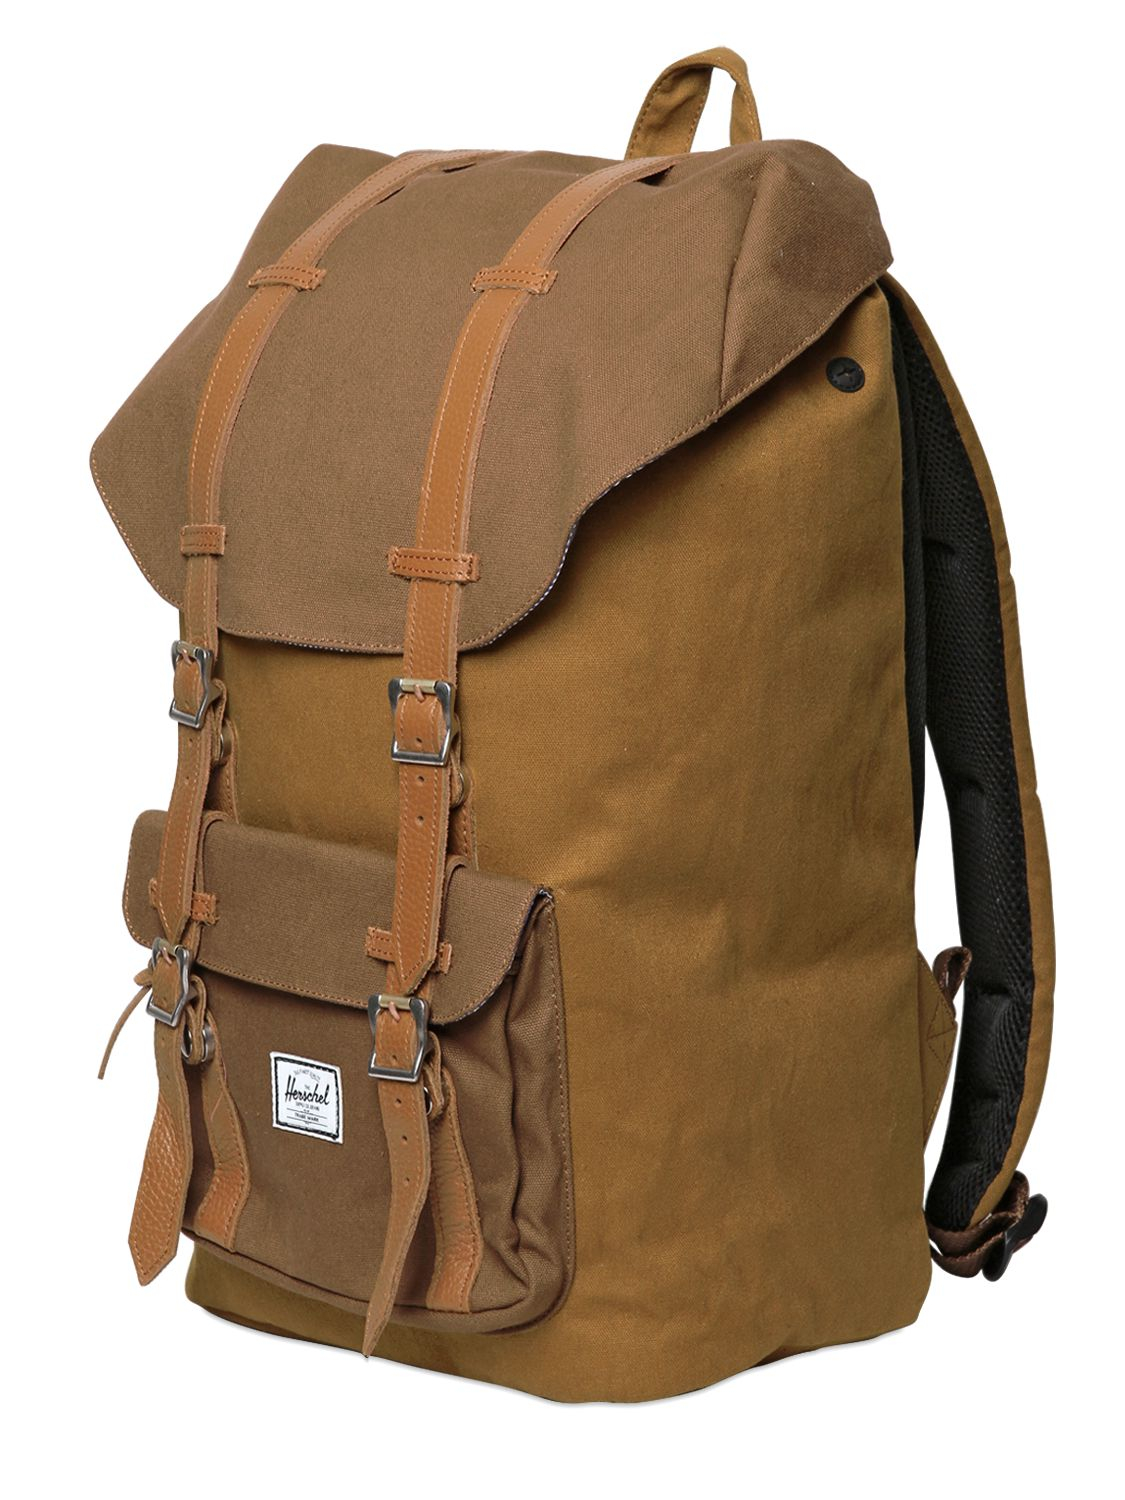 Herschel Supply Co. Little America Select Backpack in Brown for Men - Lyst